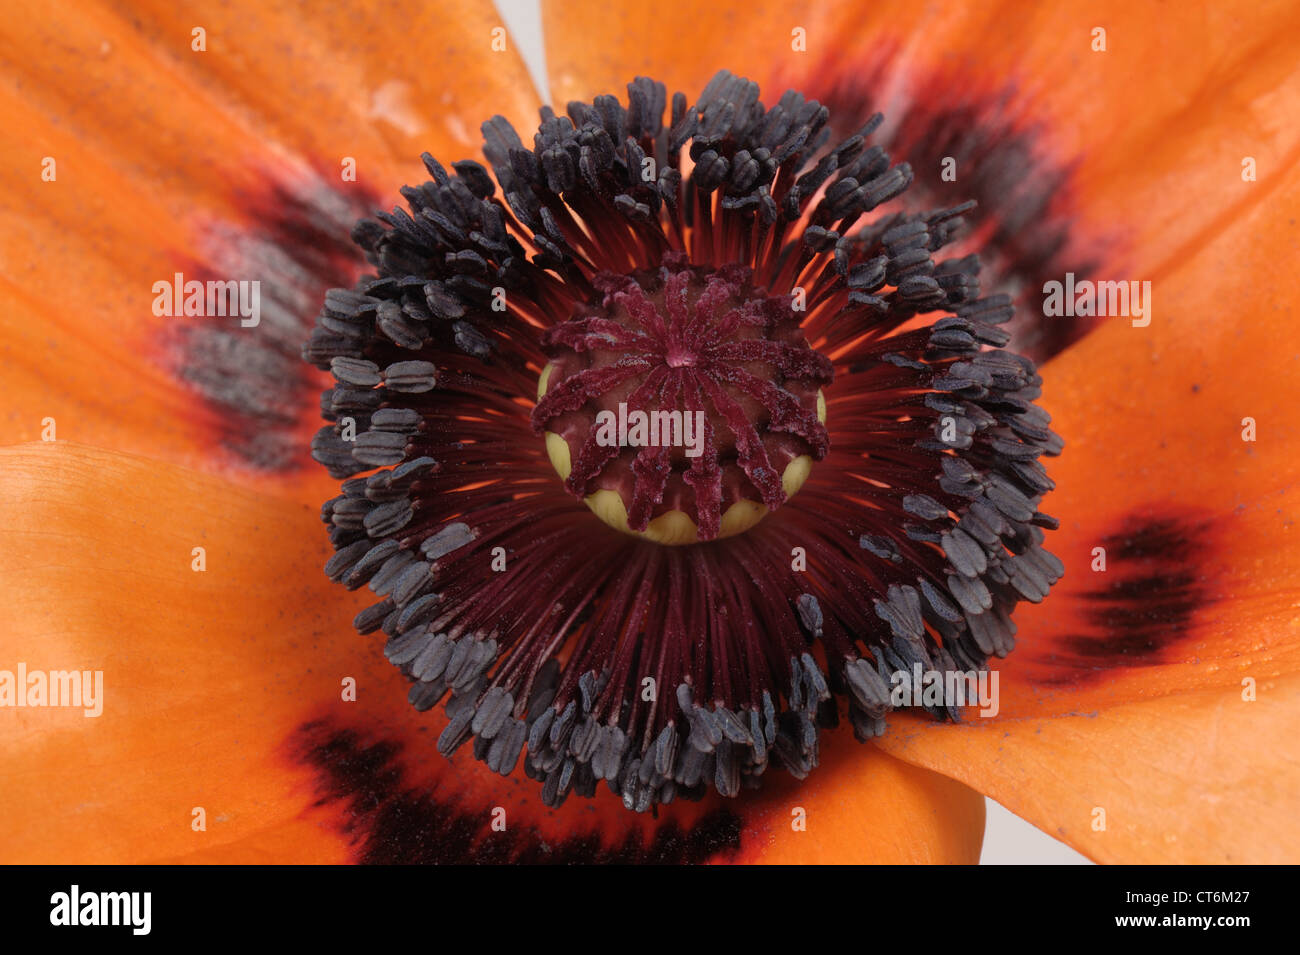 Flowering parts of a red oriental poppy flower (Papaver orientalis) Stock Photo